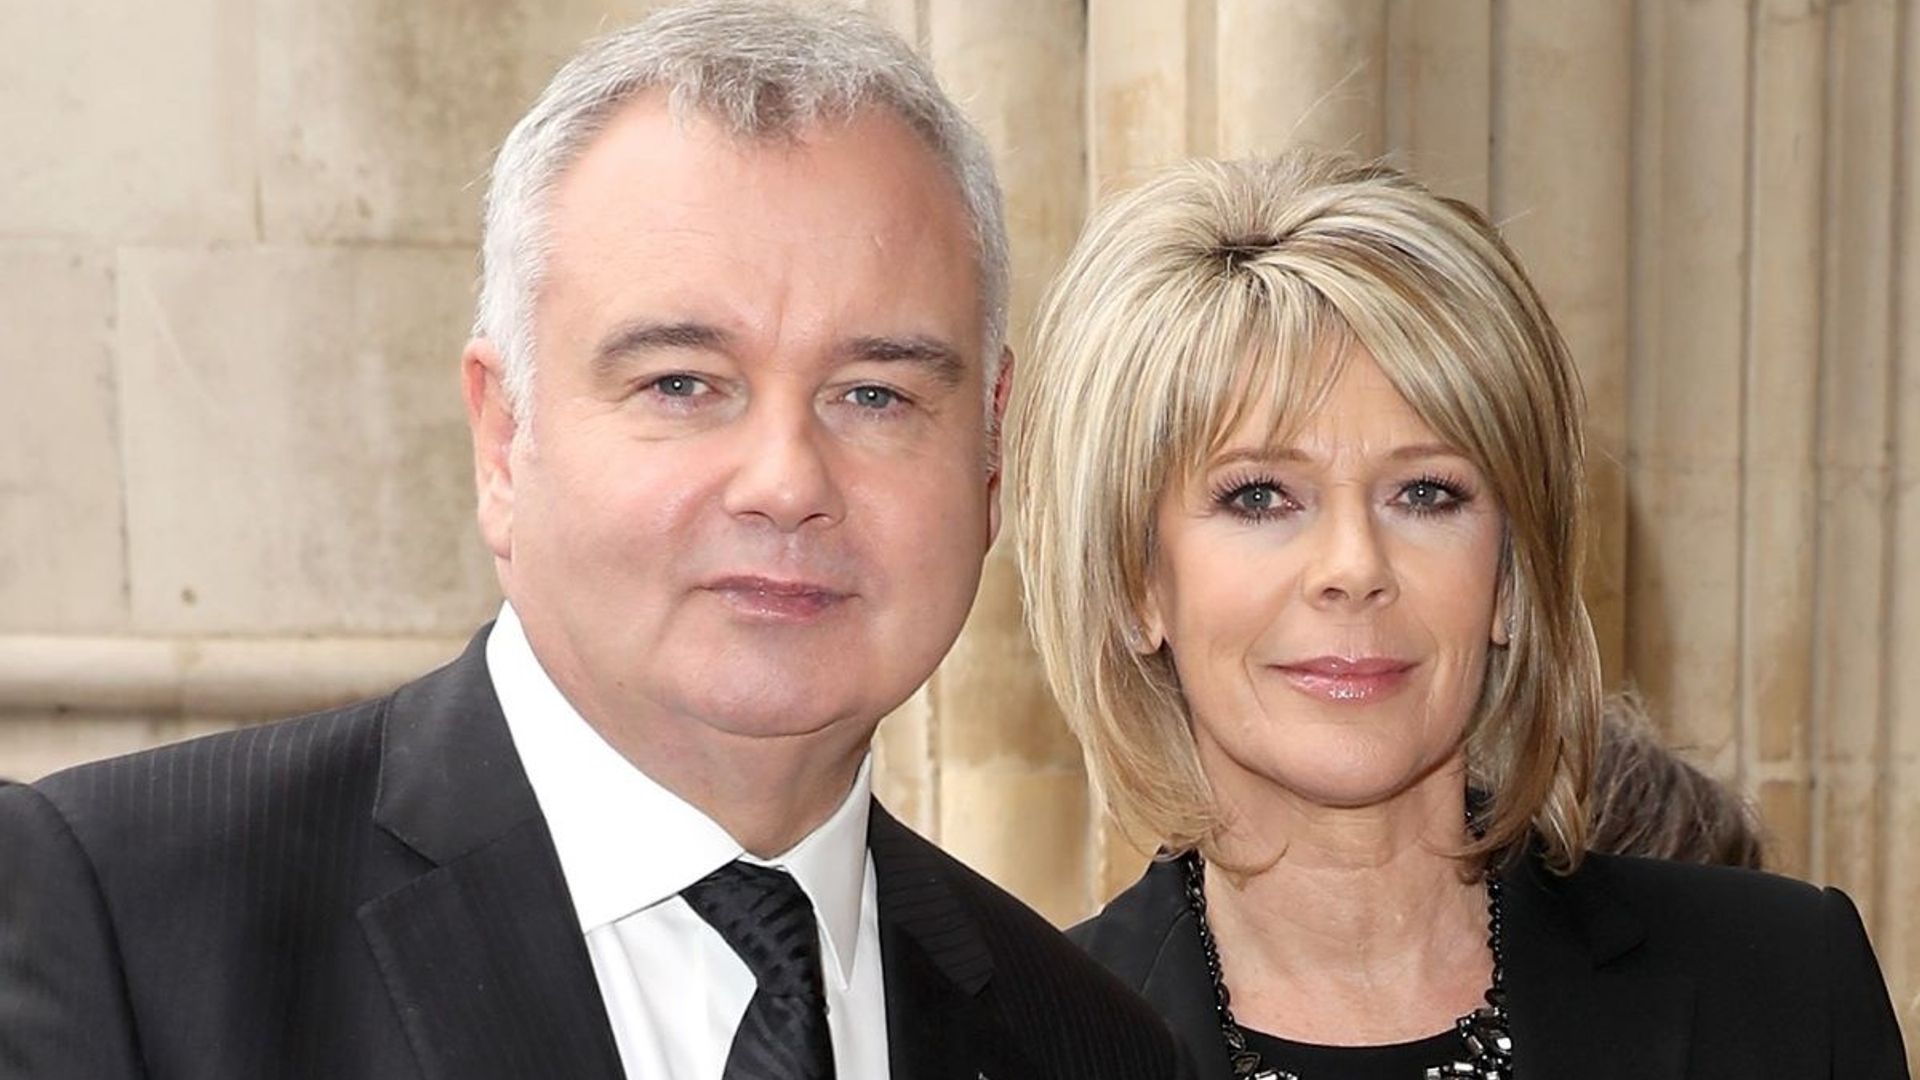 Ruth Langsford gives surprising update on husband Eamonn Holmes following COVID diagnosis